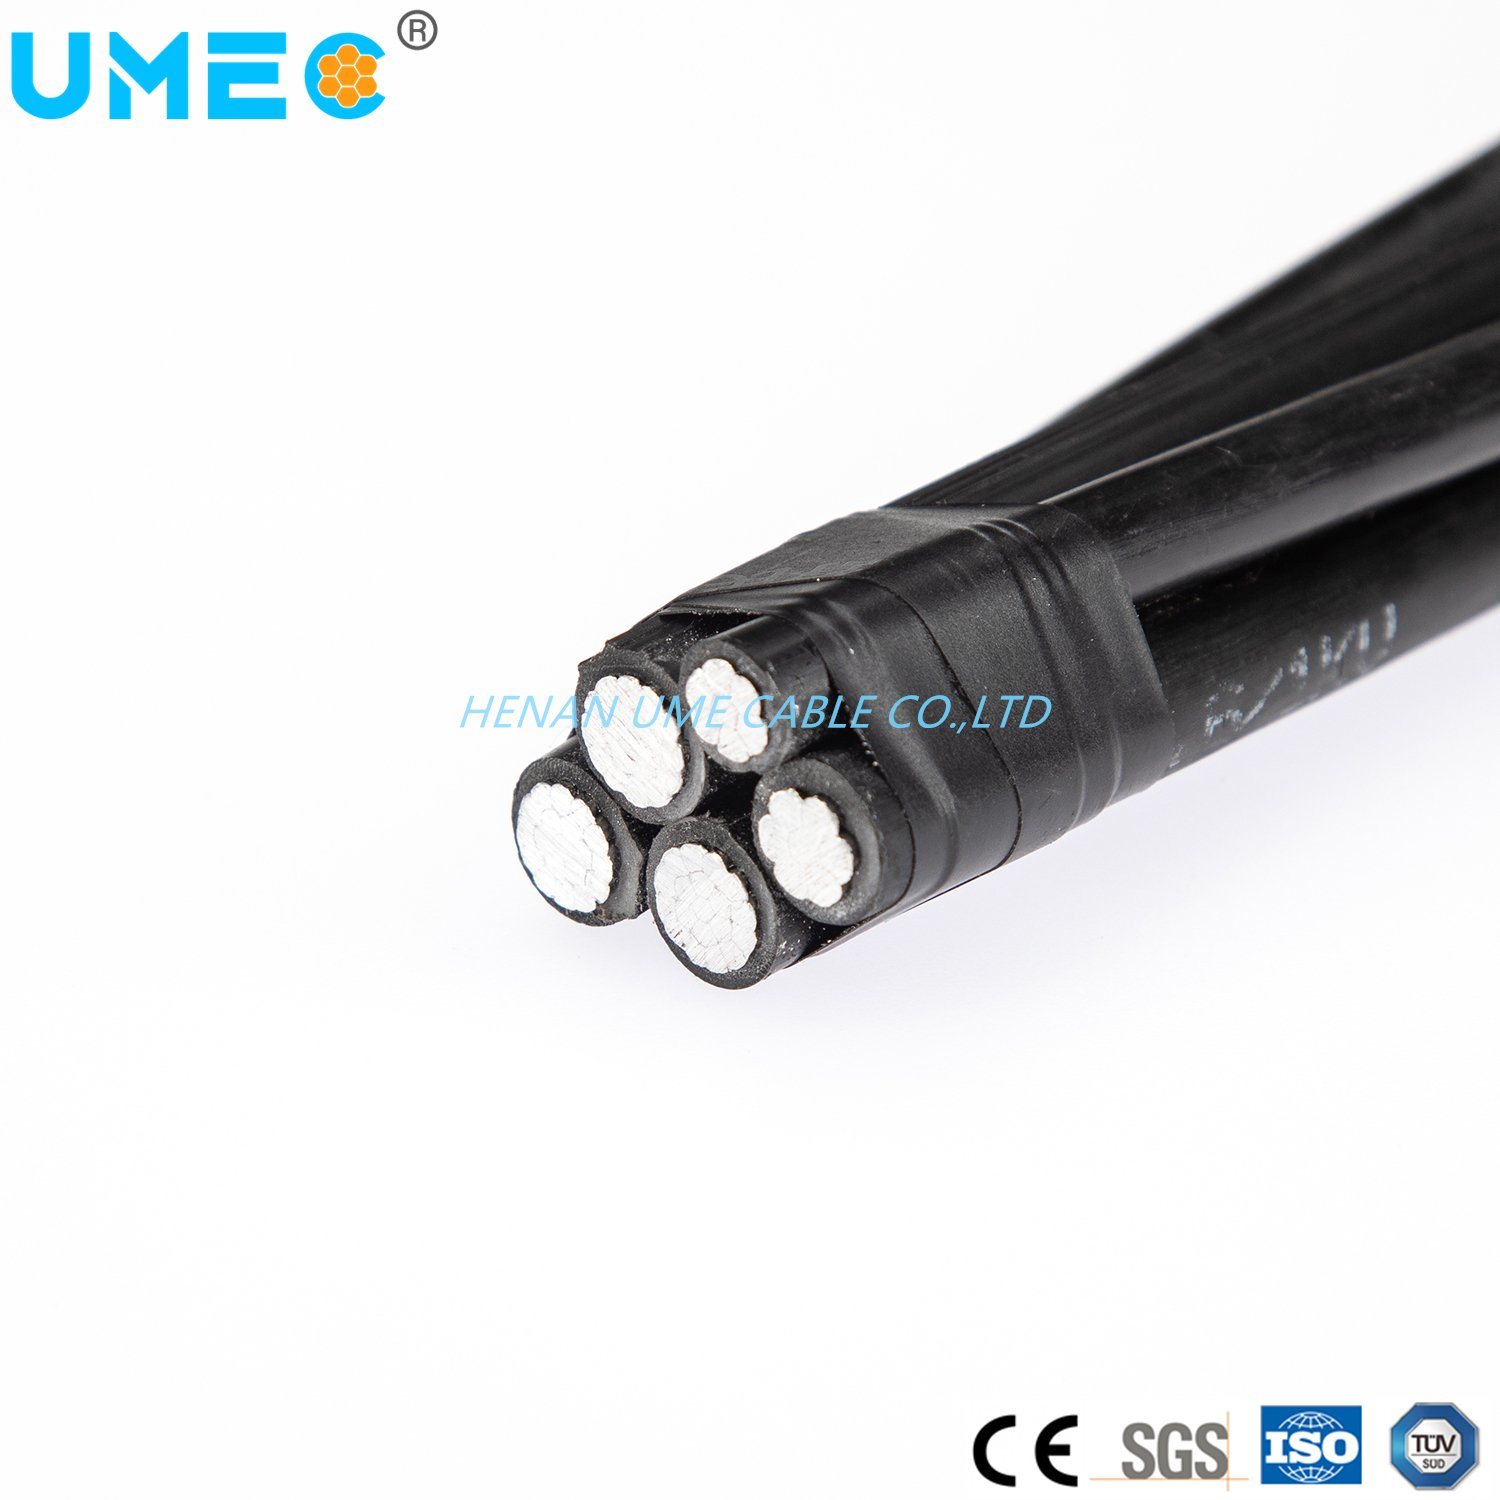 ABC Cables Service Drop Cables Aluminium Conductor XLPE Insulated Caai/Self-Supporting Cable